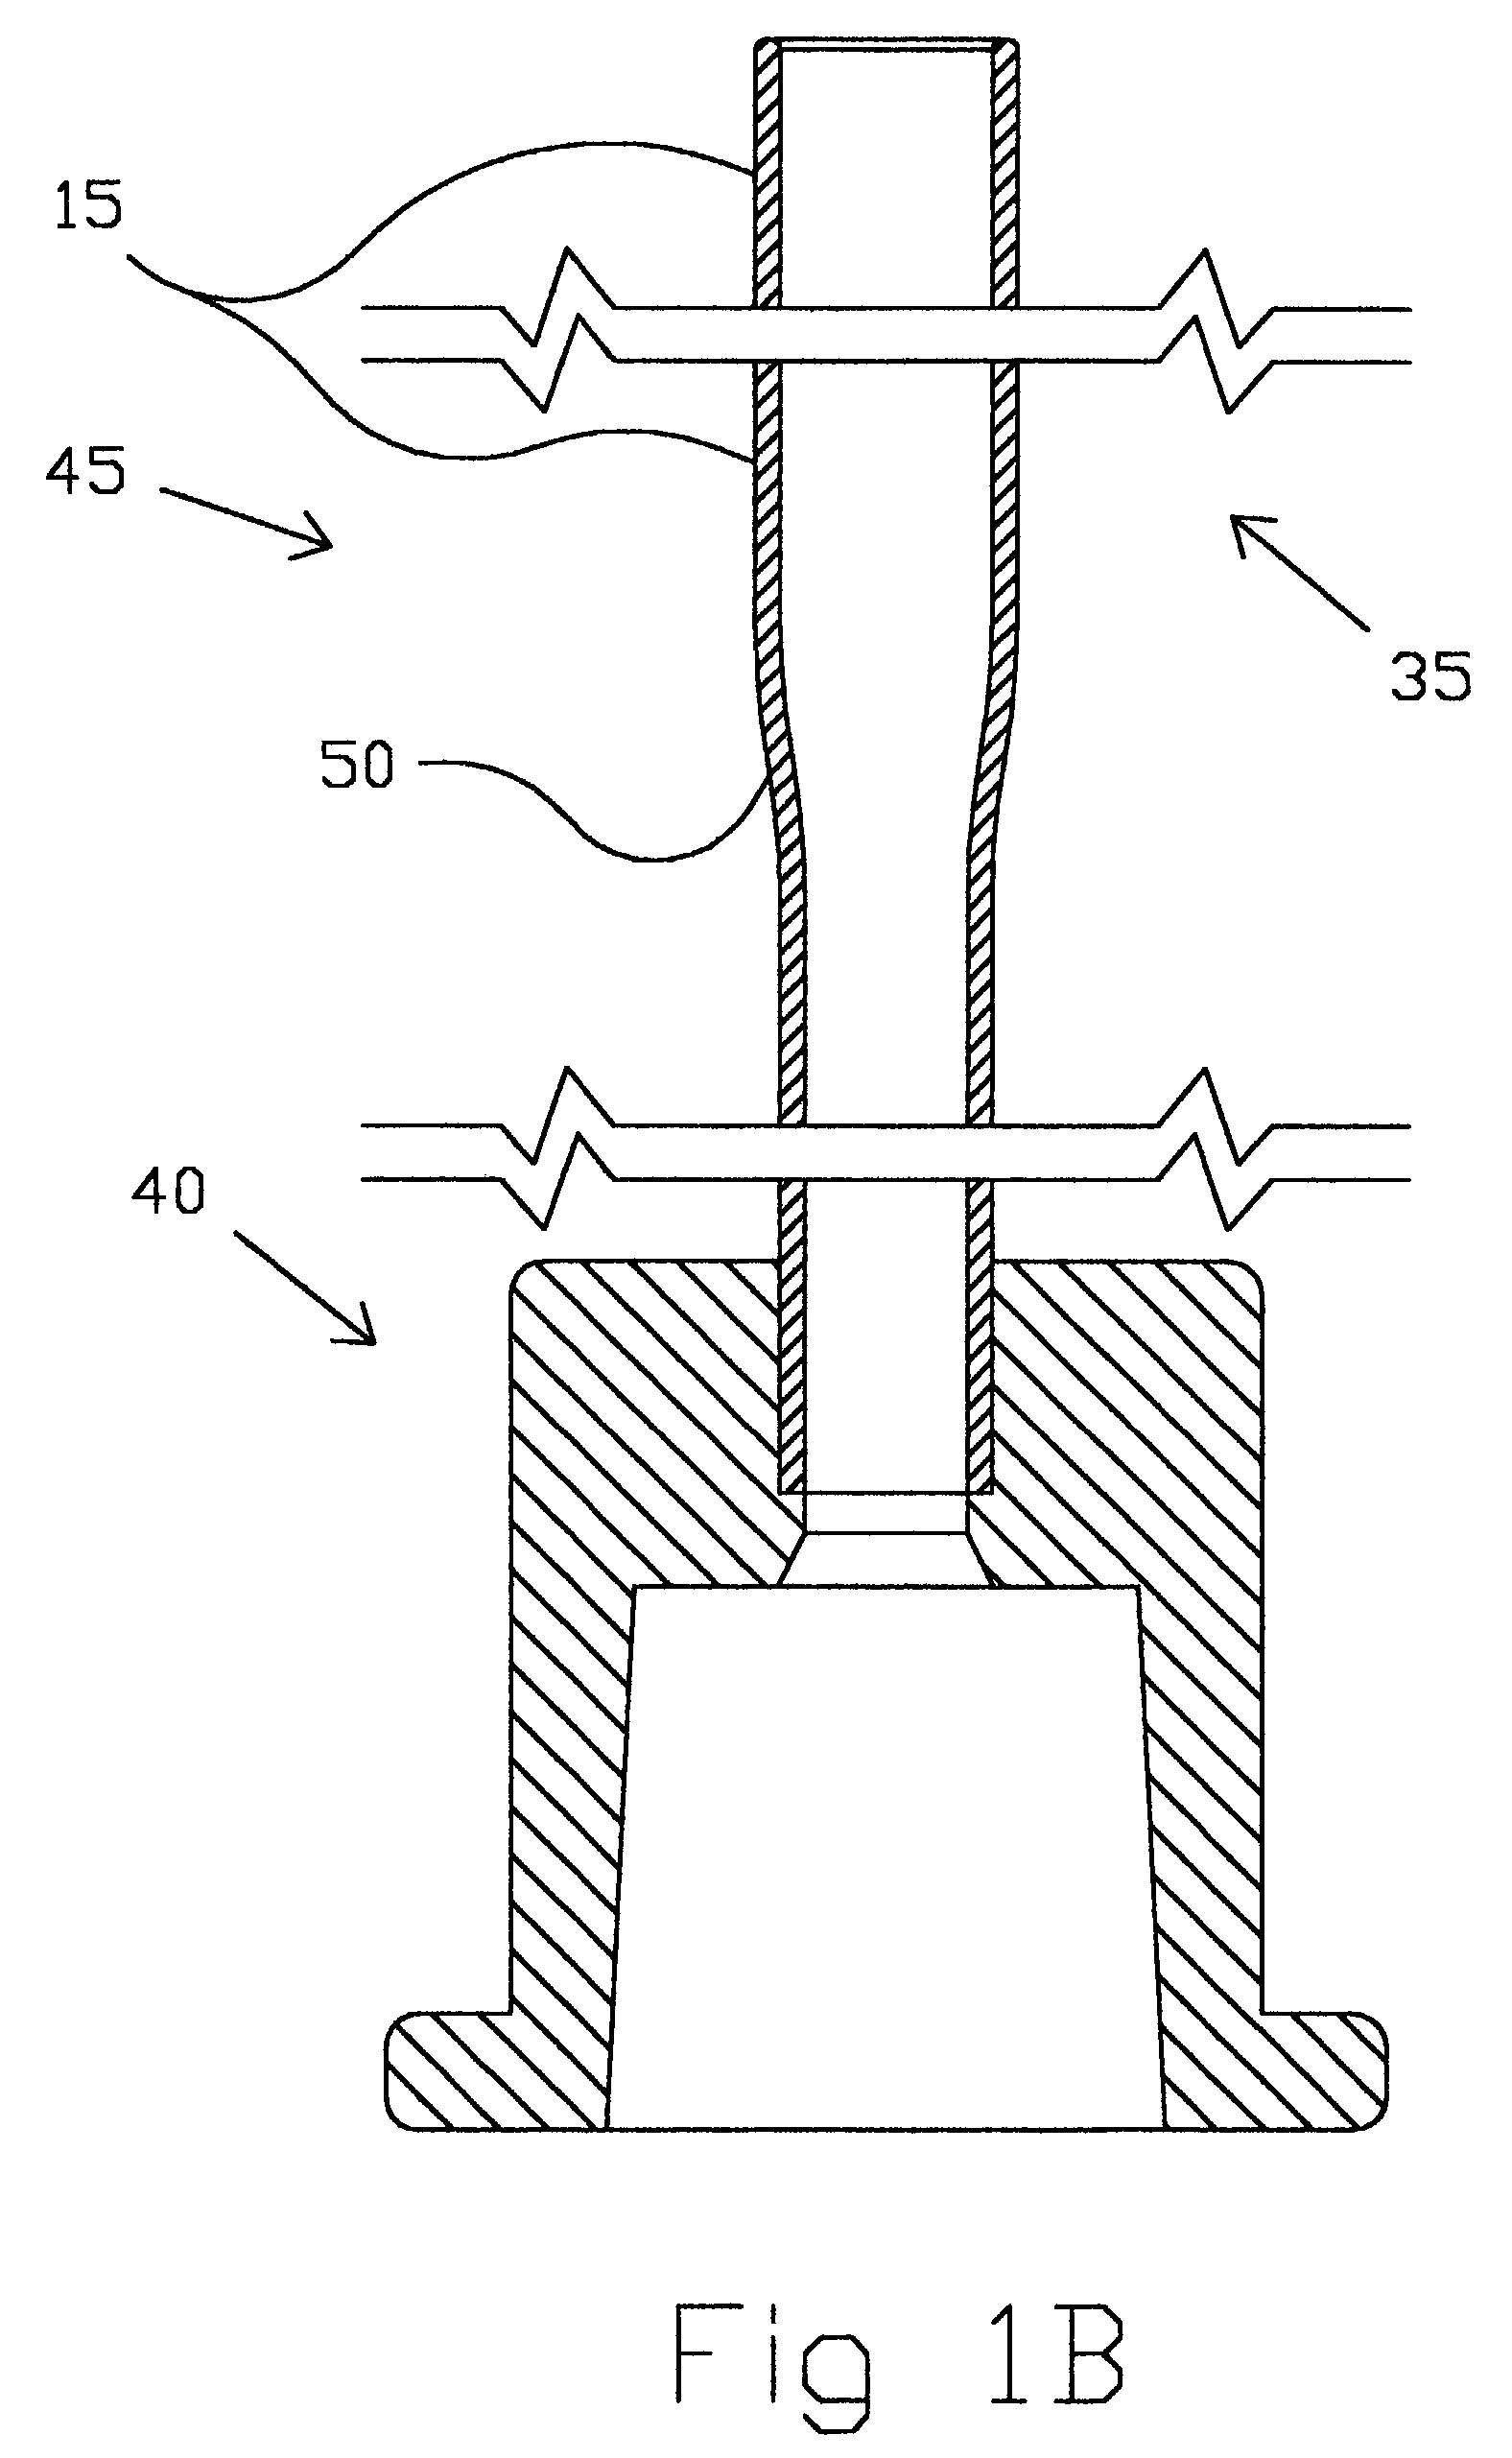 Distal protection and delivery system and method